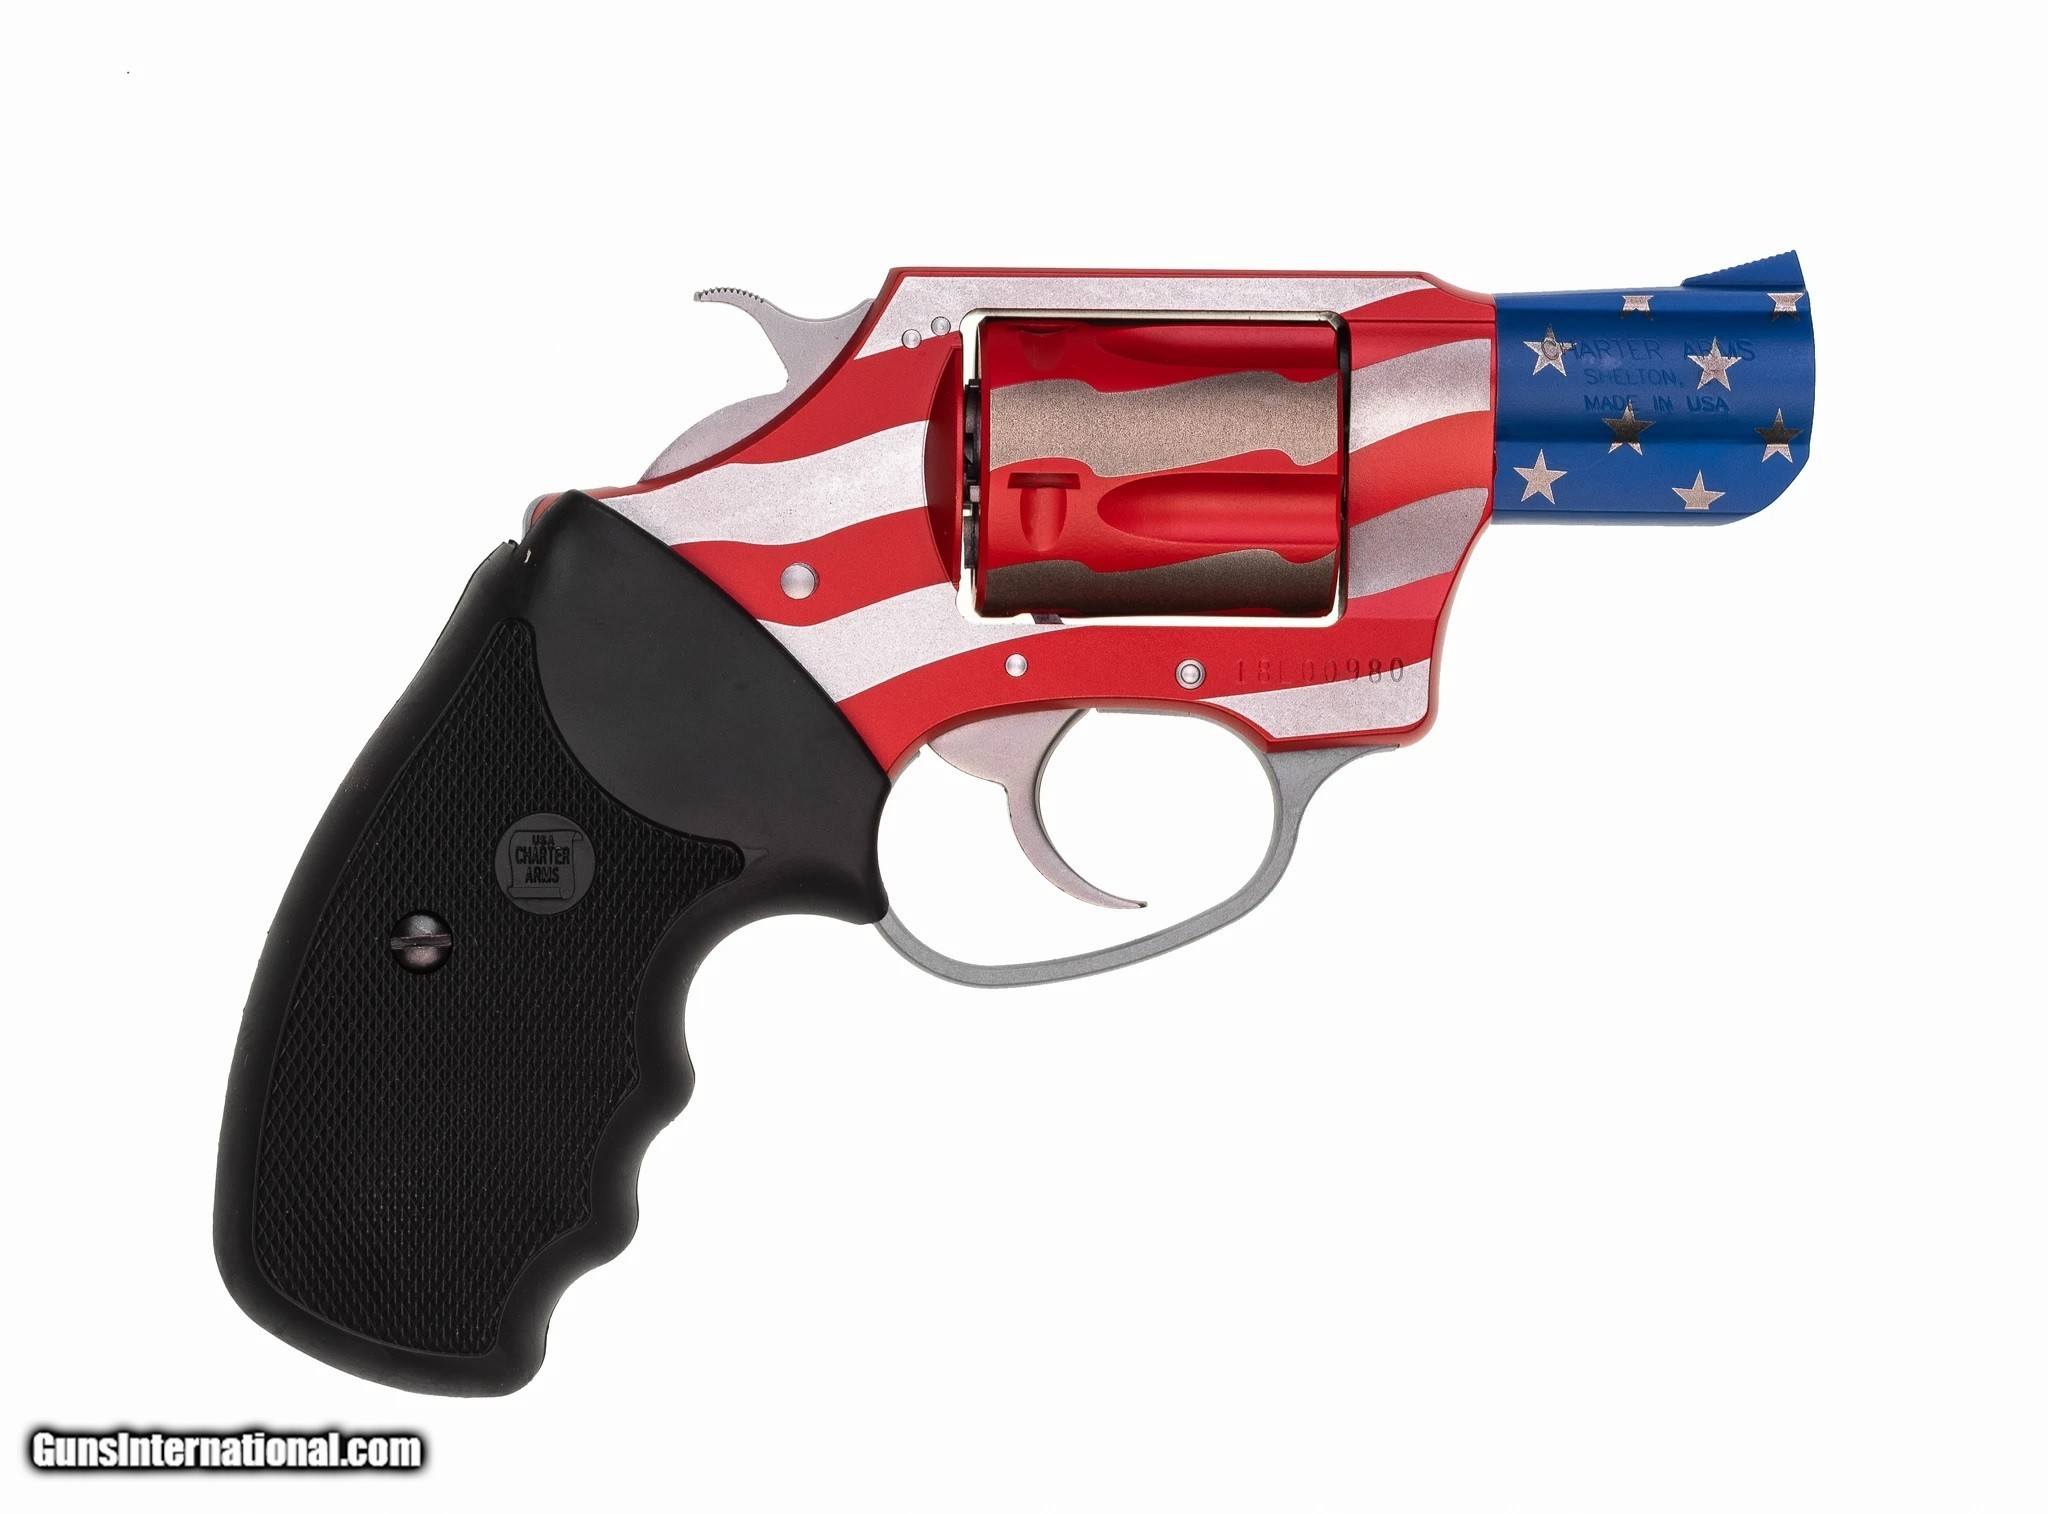 charter arms revolvers cannot uncock